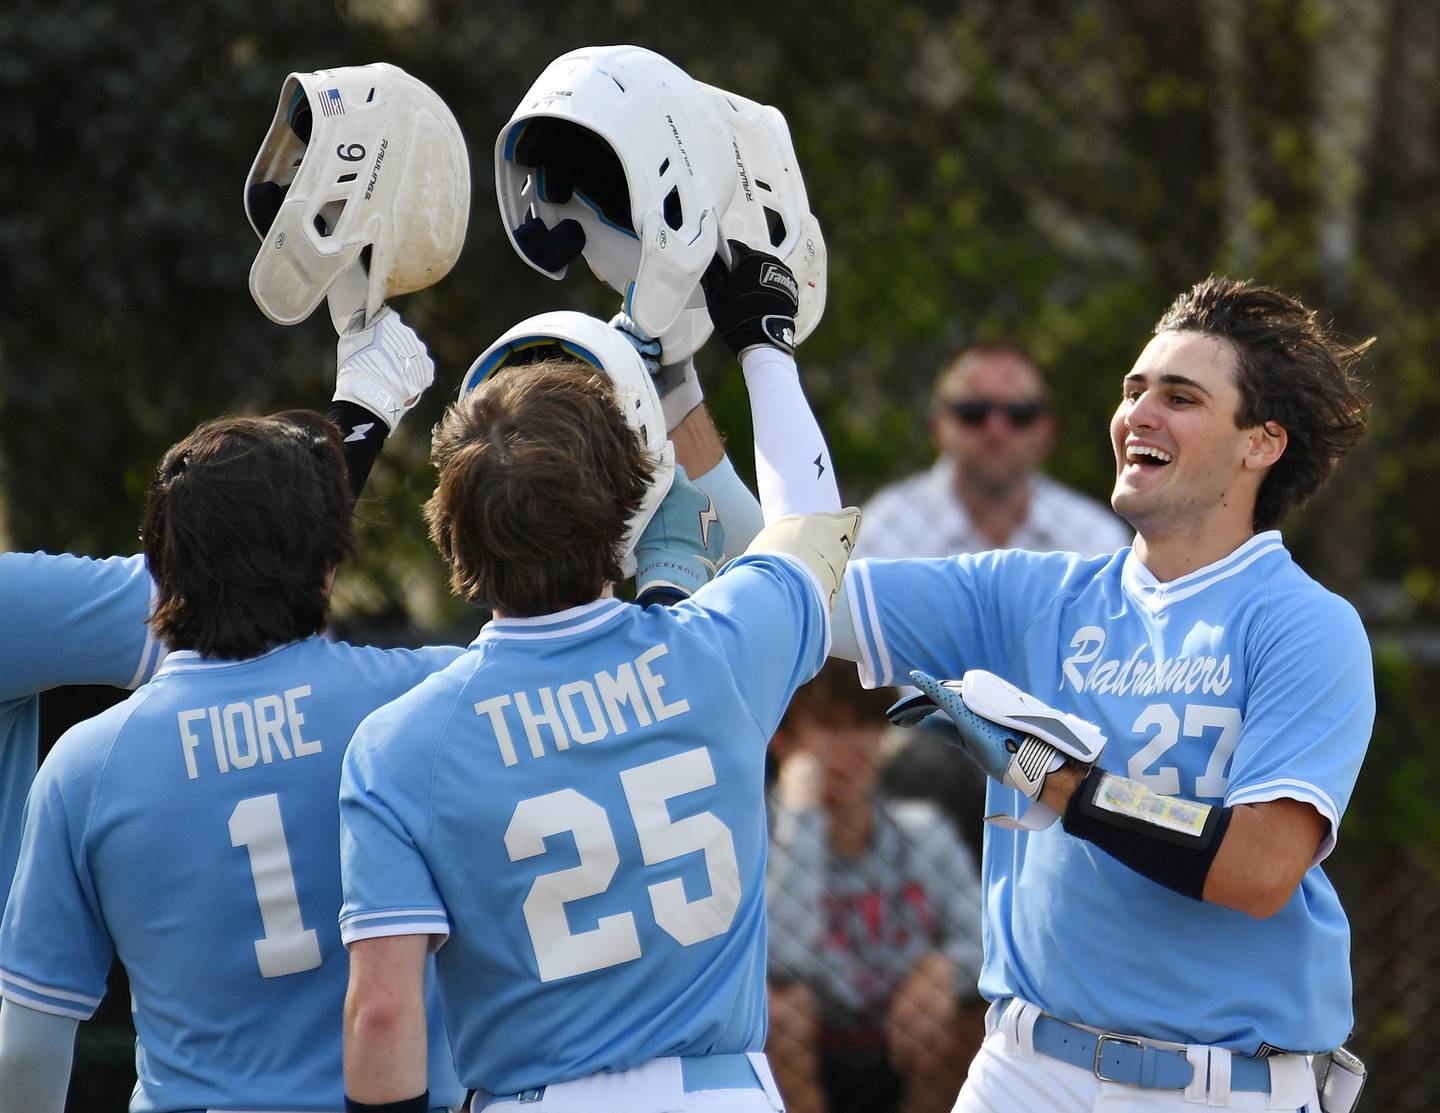 David Cox (right) celebrates with Nazareth Academy teammates after his two run home run in the first inning of a game against Benet on April 22, 2024 at Benet Academy in Lisle.